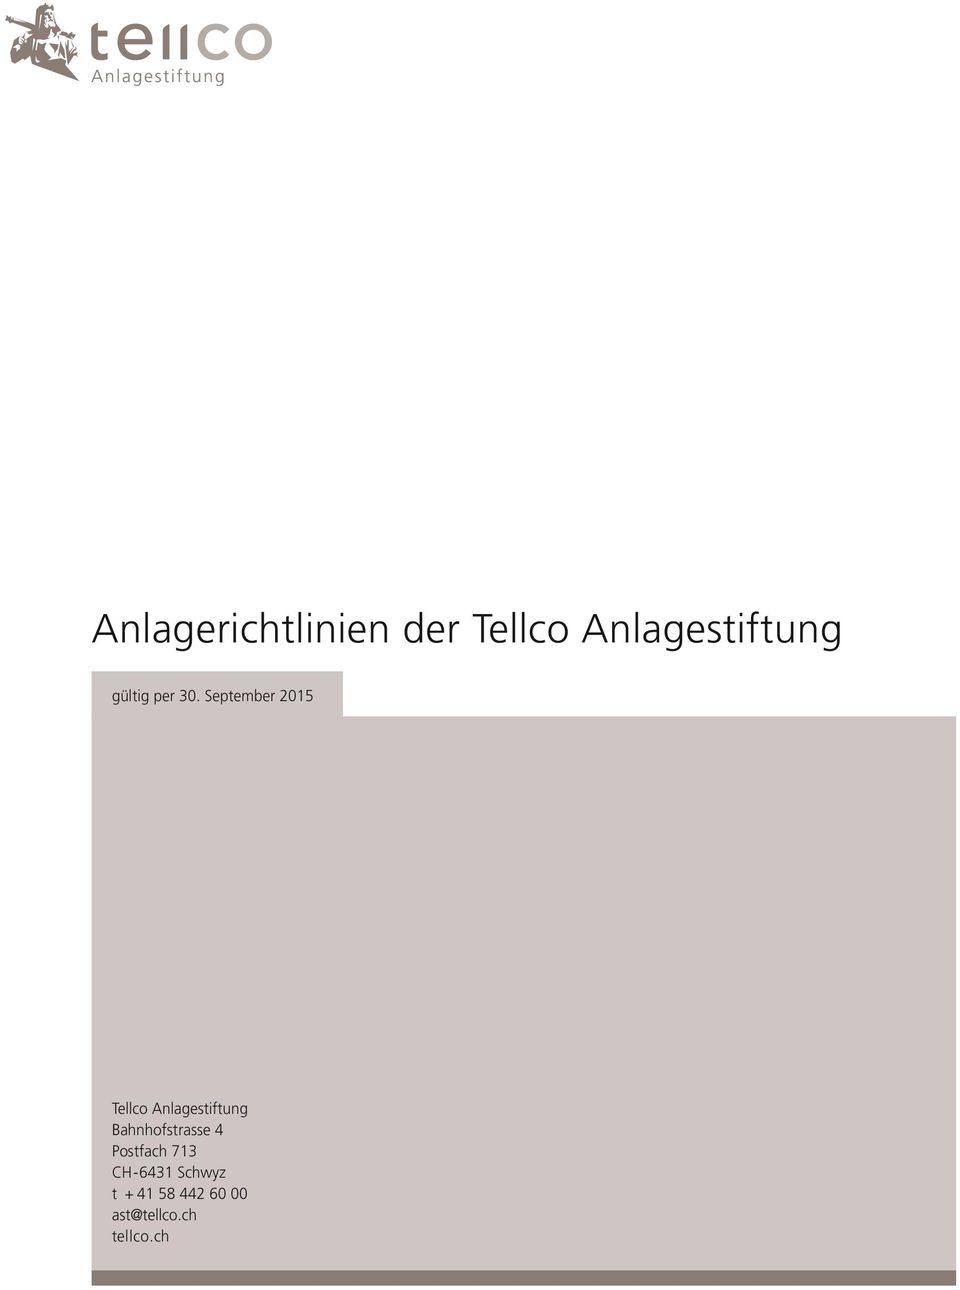 September 2015 Tellco Anlagestiftung